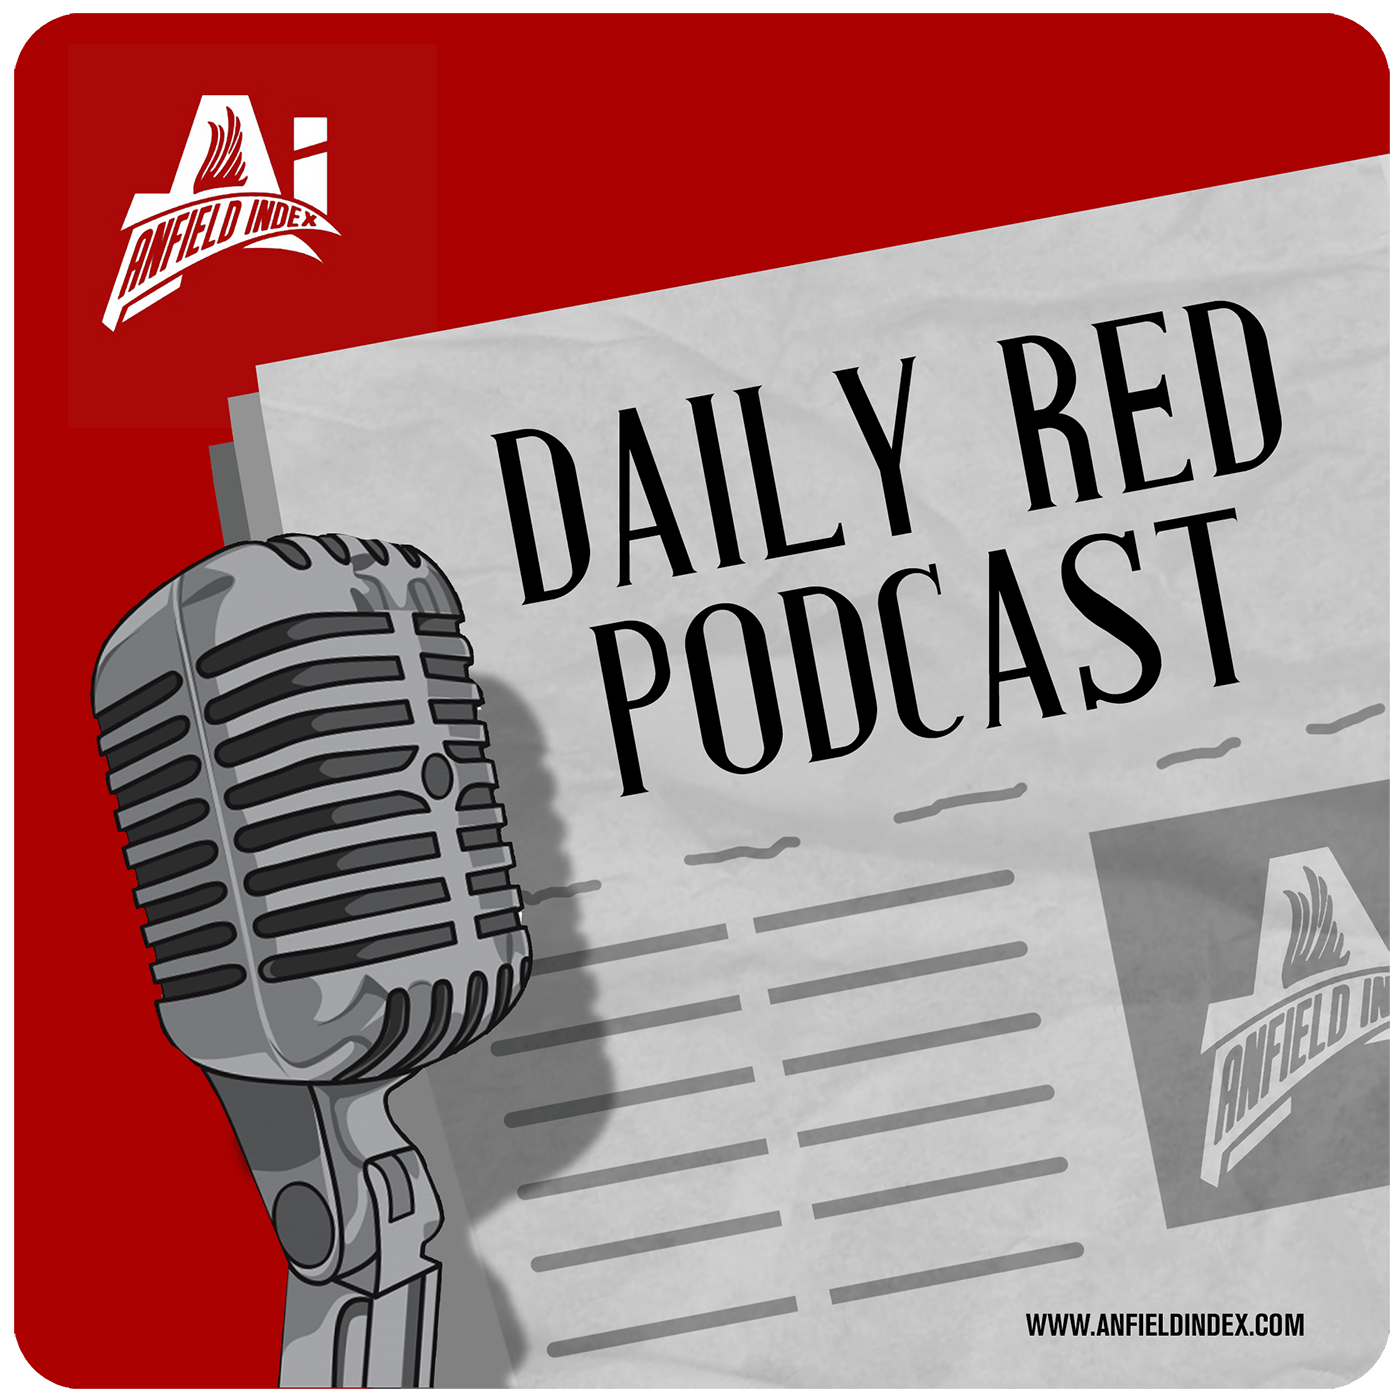 The Daily Bhoy - Daily Red Podcast